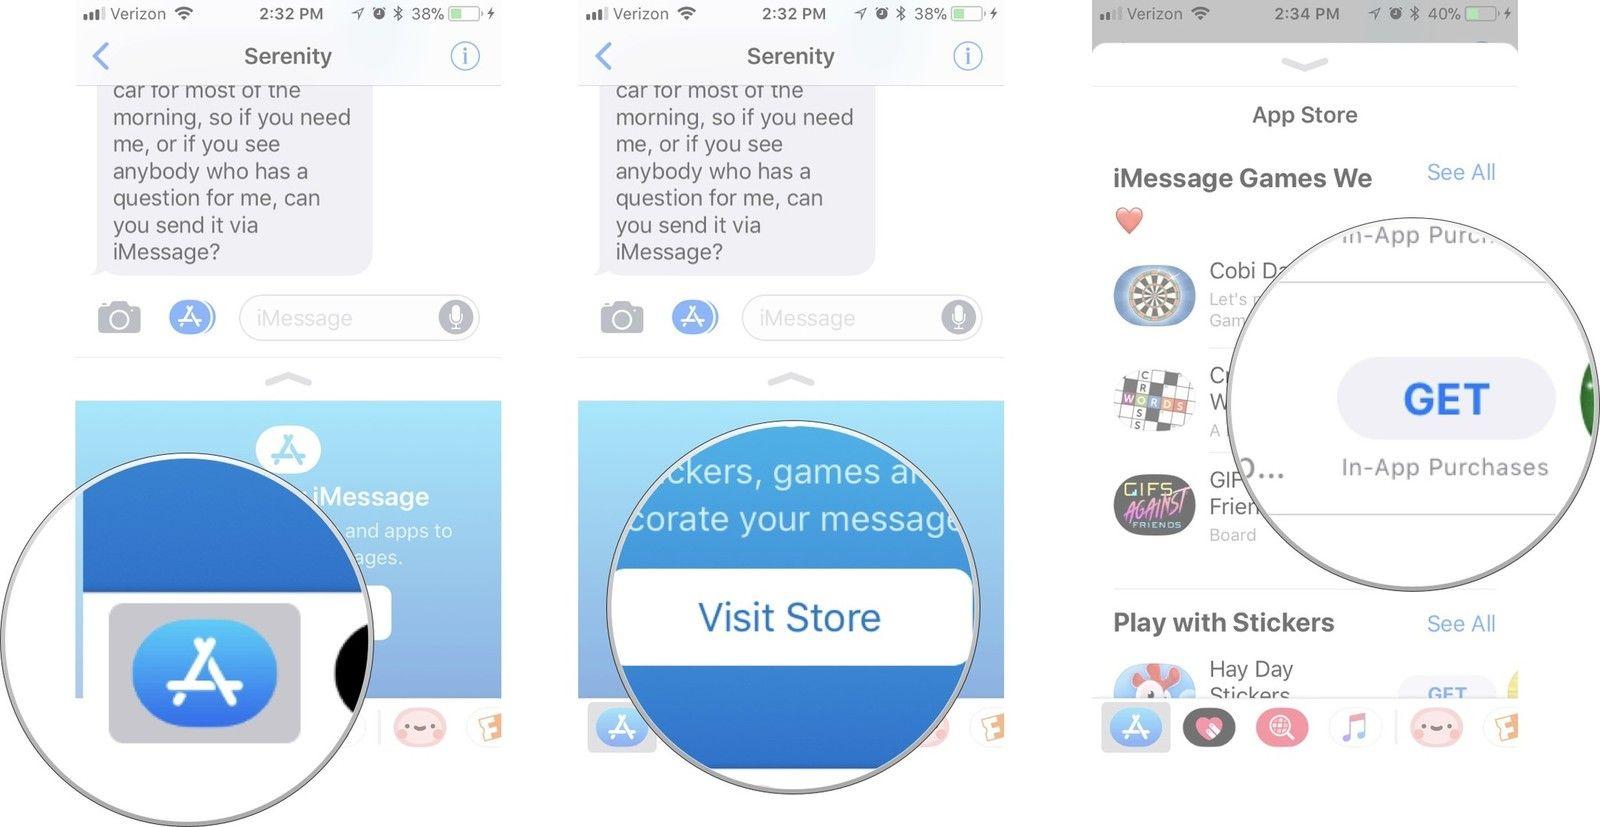 iMessage App Logo - How to use sticker and apps in iMessage on iPhone and iPad | iMore